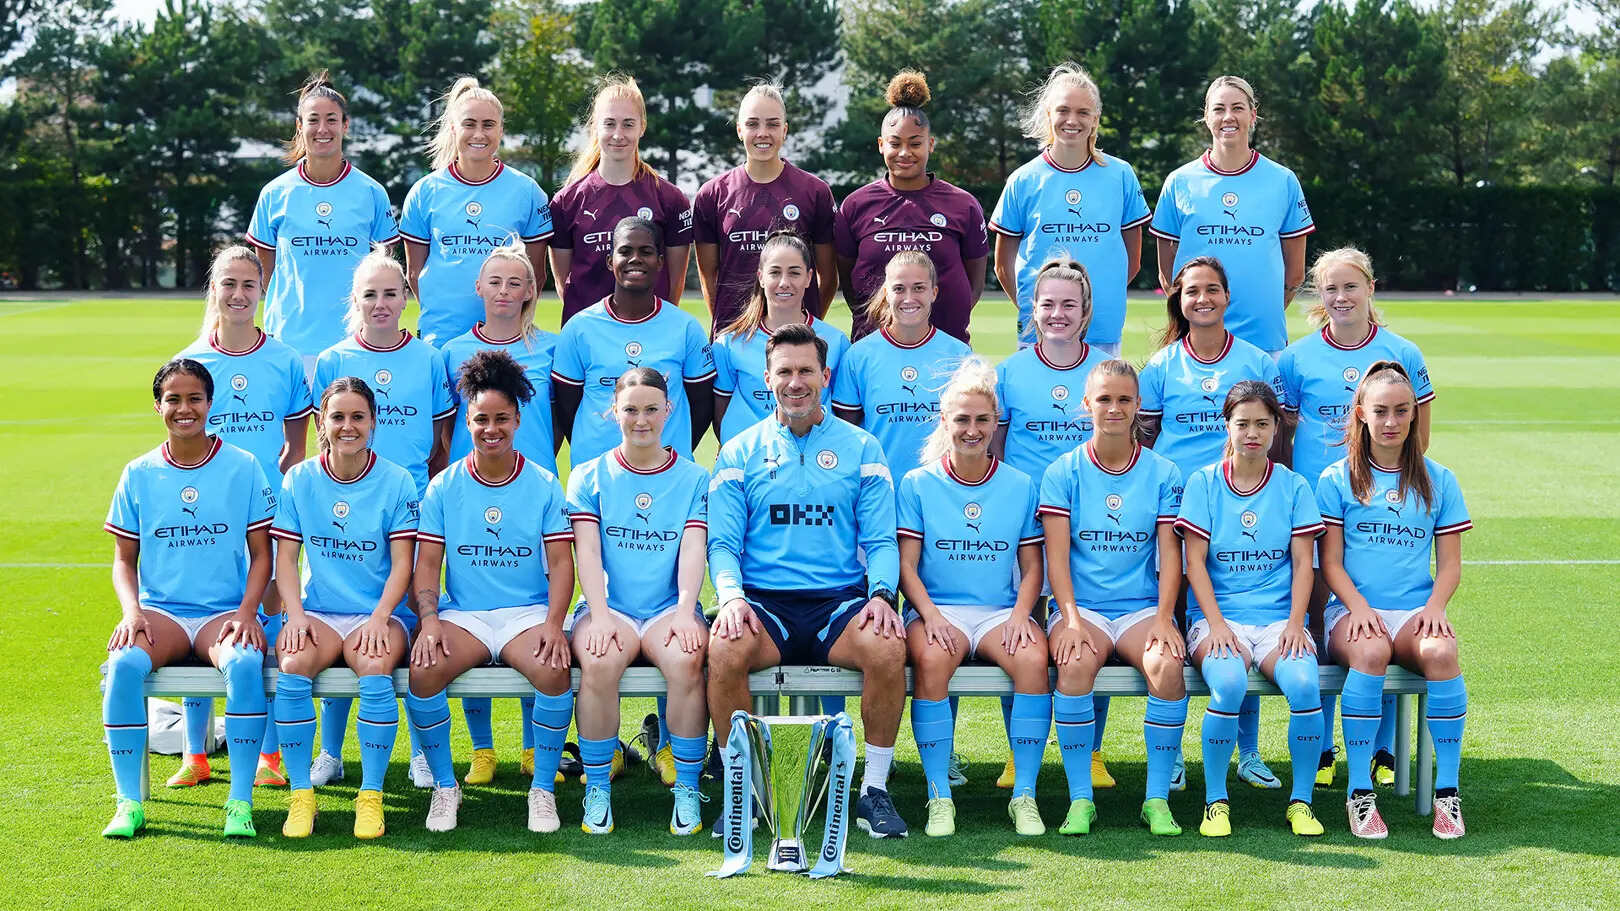 Manchester City WFC: 14 Football Club Facts 